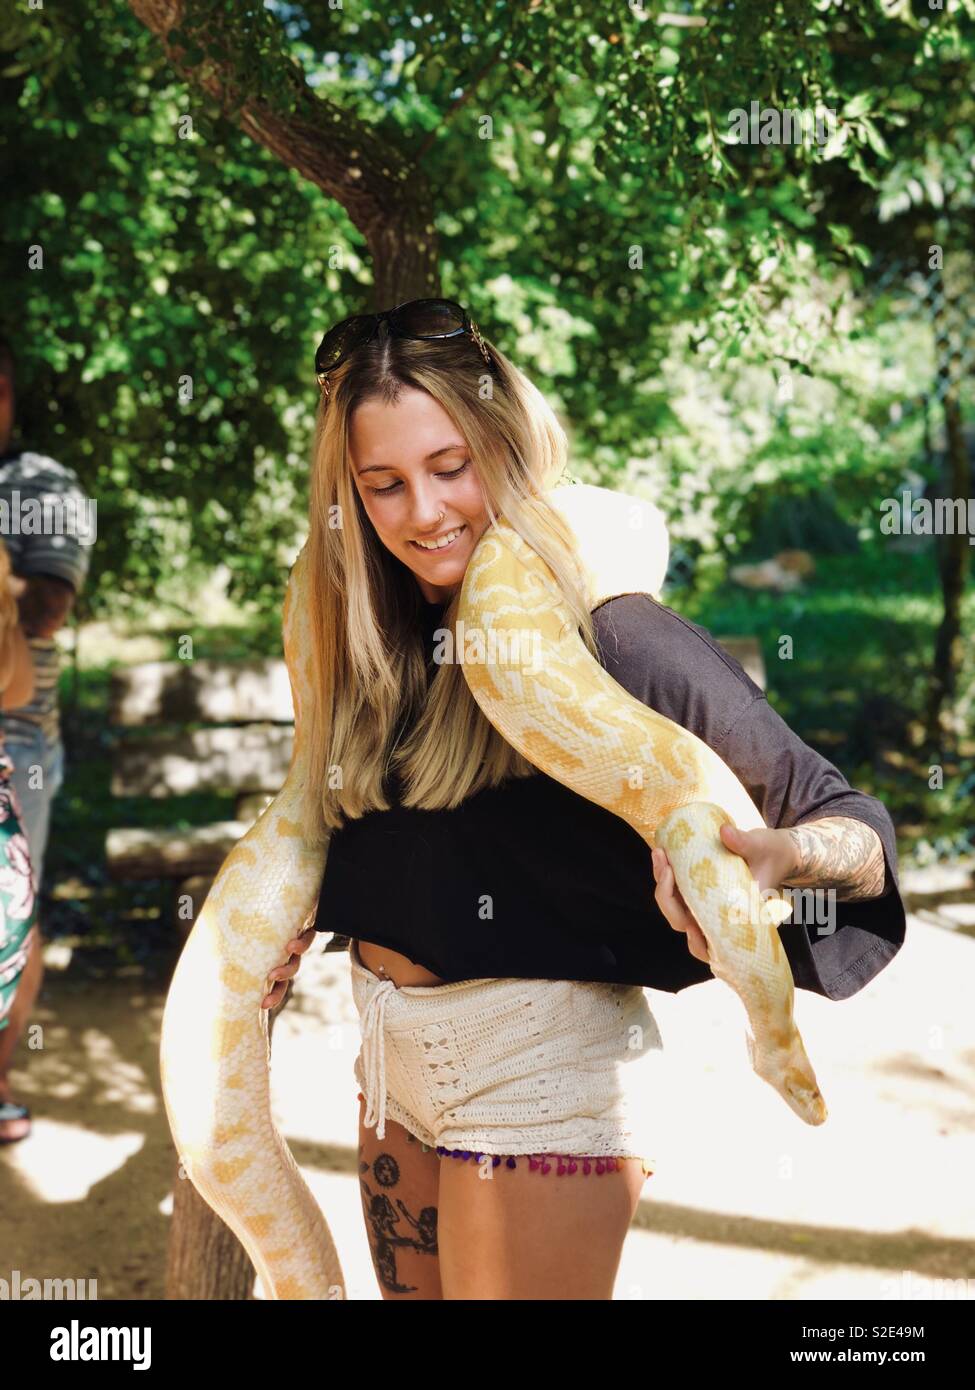 Girl with a snake Stock Photo